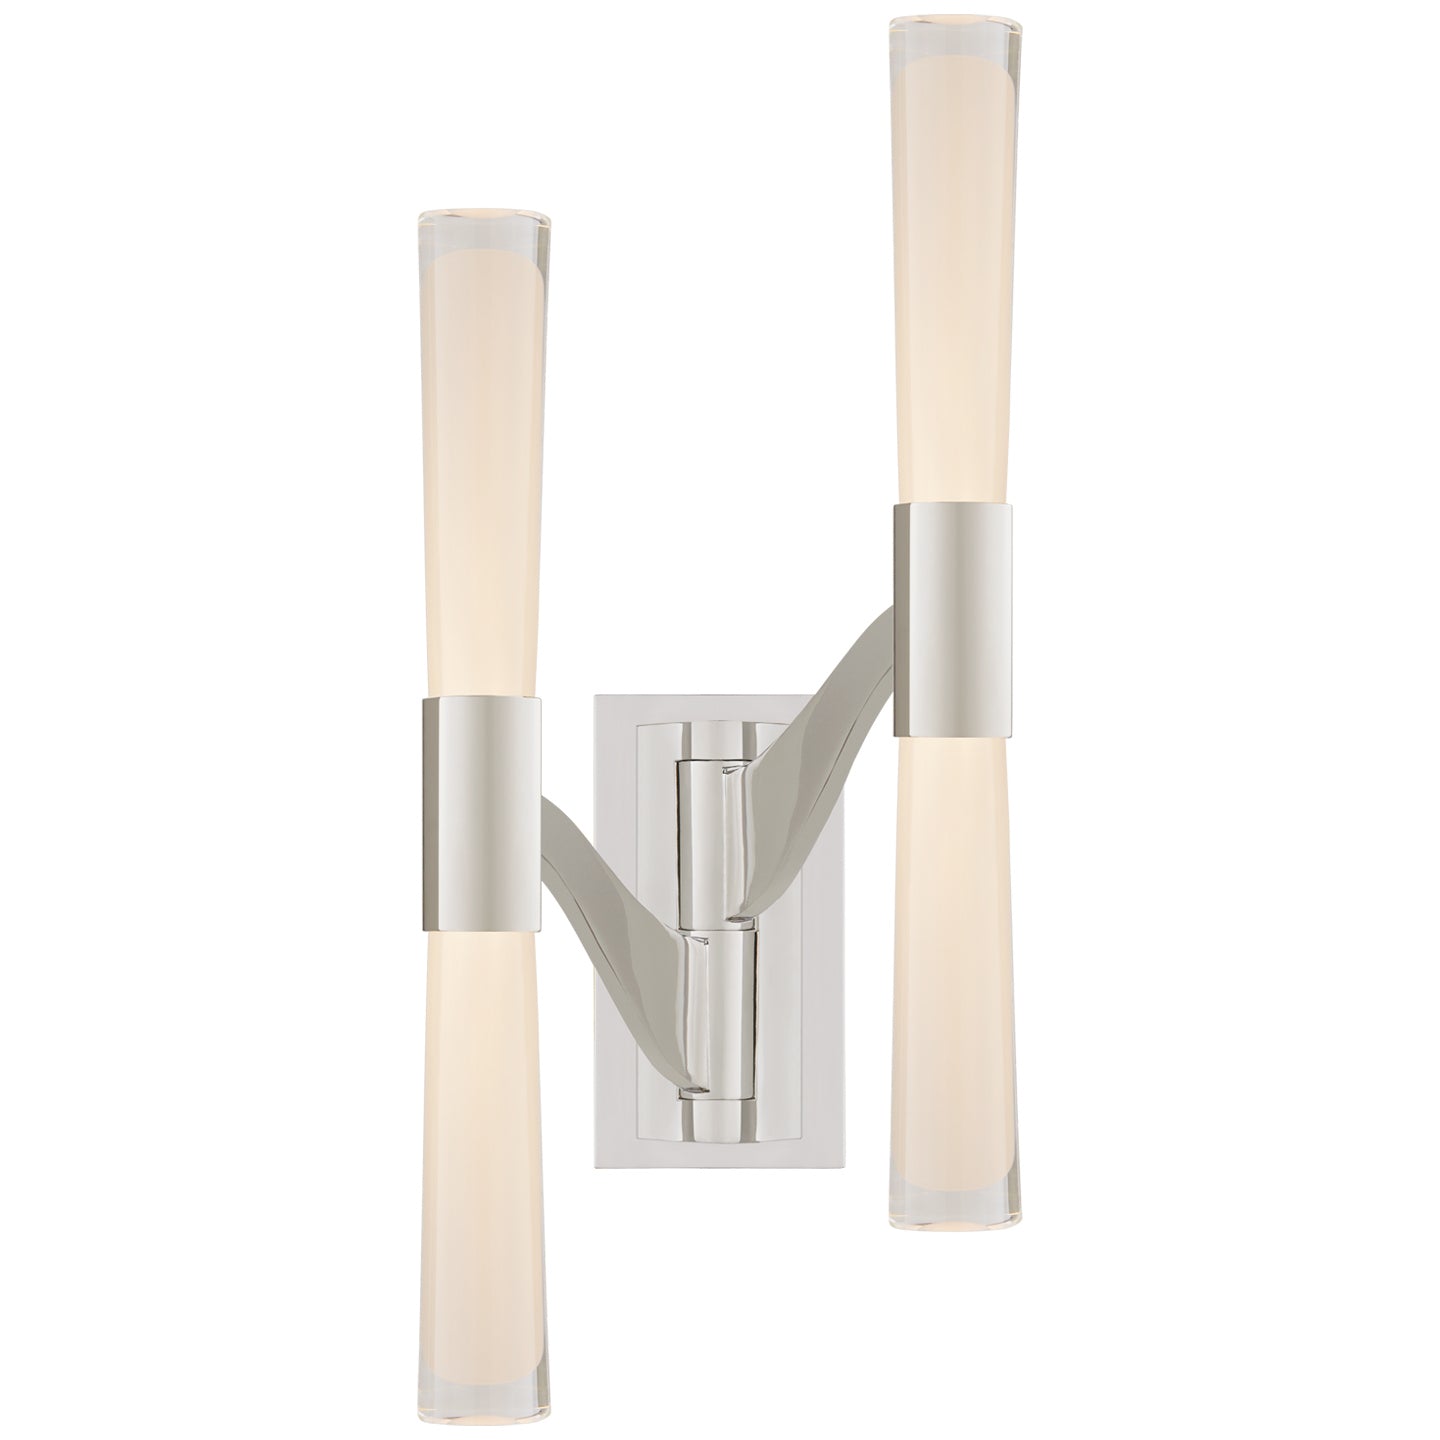 Load image into Gallery viewer, Visual Comfort Signature - ARN 2471PN-CG - LED Wall Sconce - Brenta - Polished Nickel
